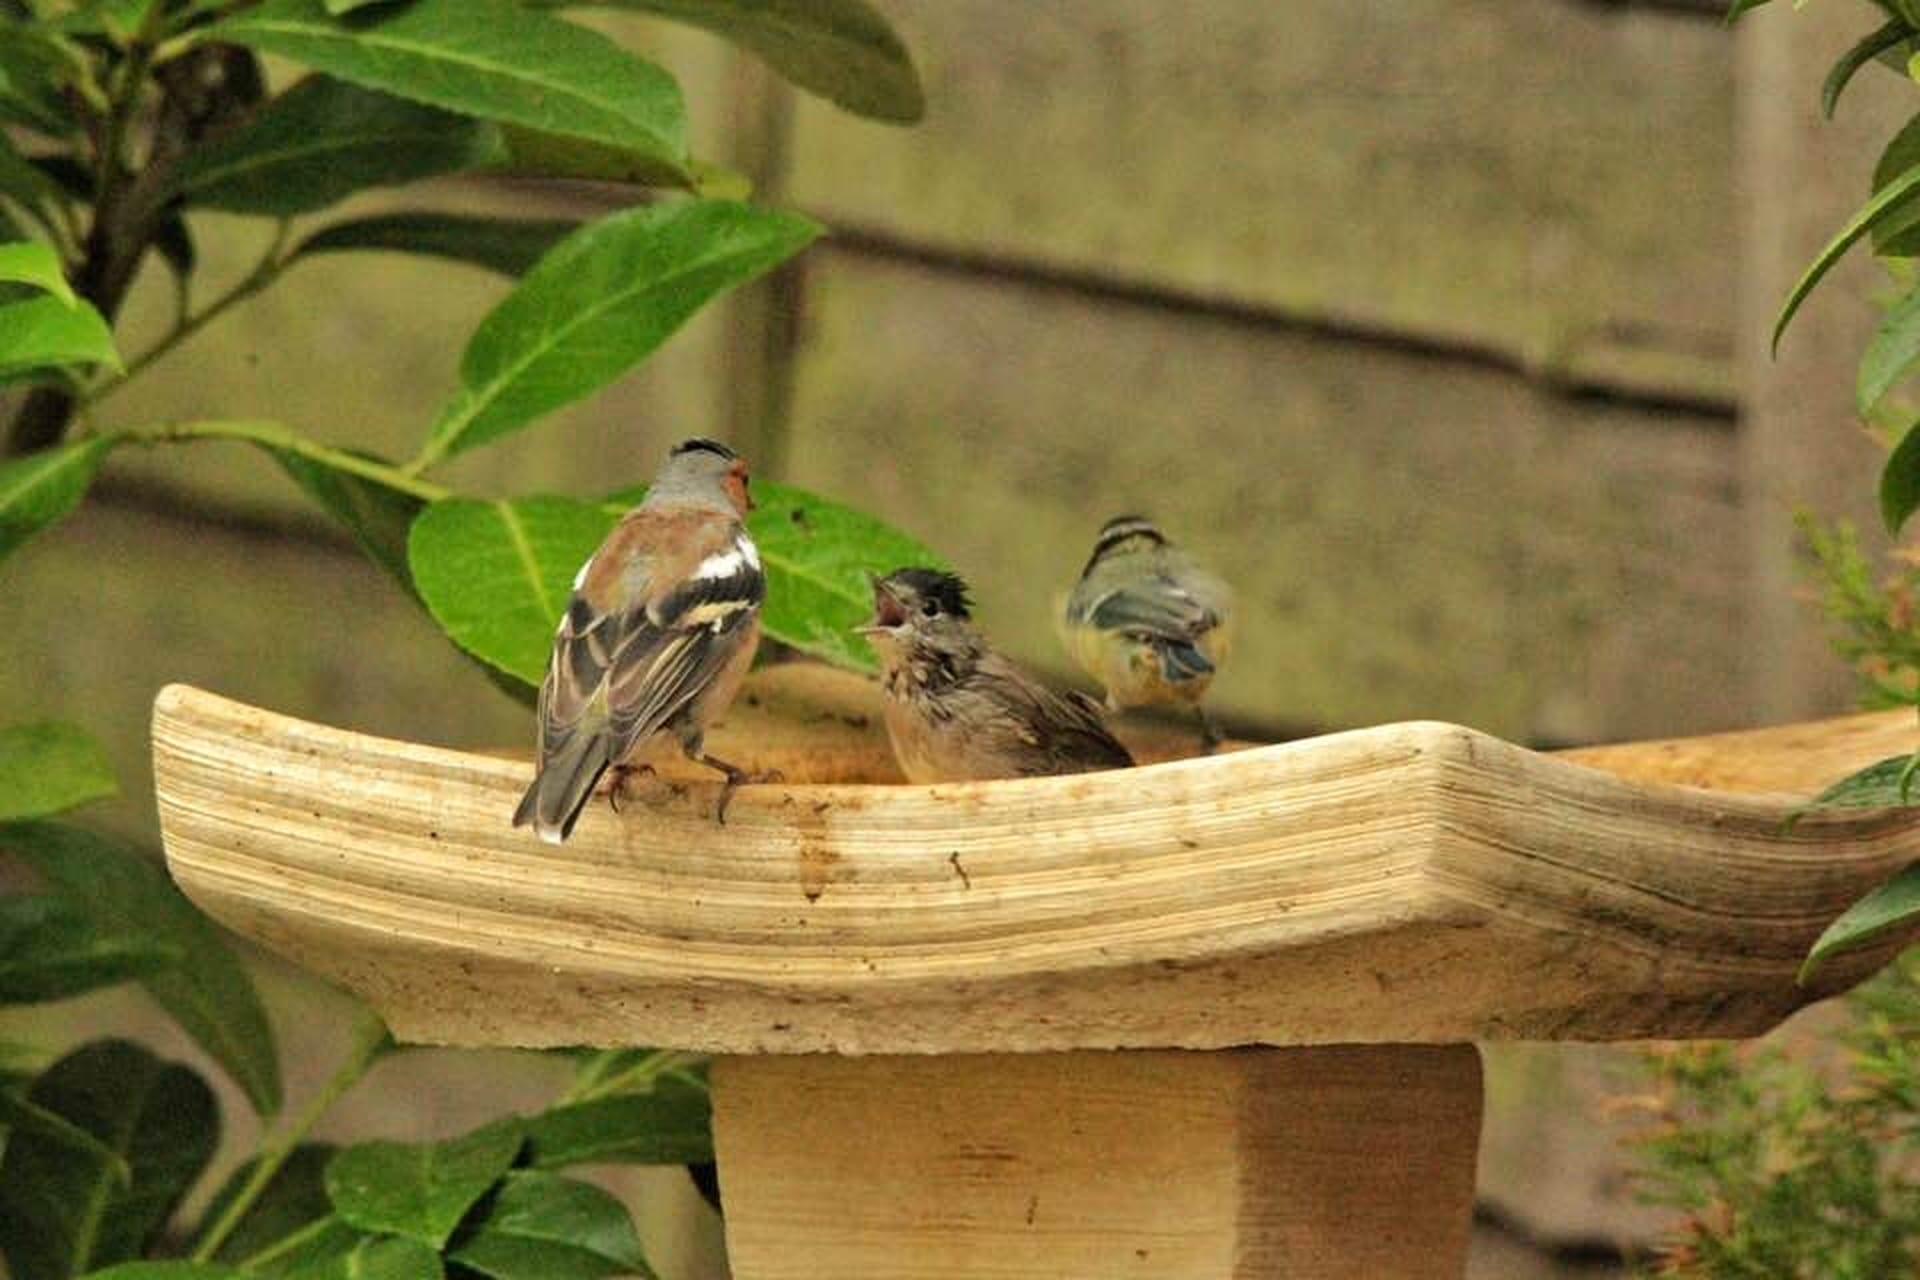 Blackcap and Chaffinch bathing